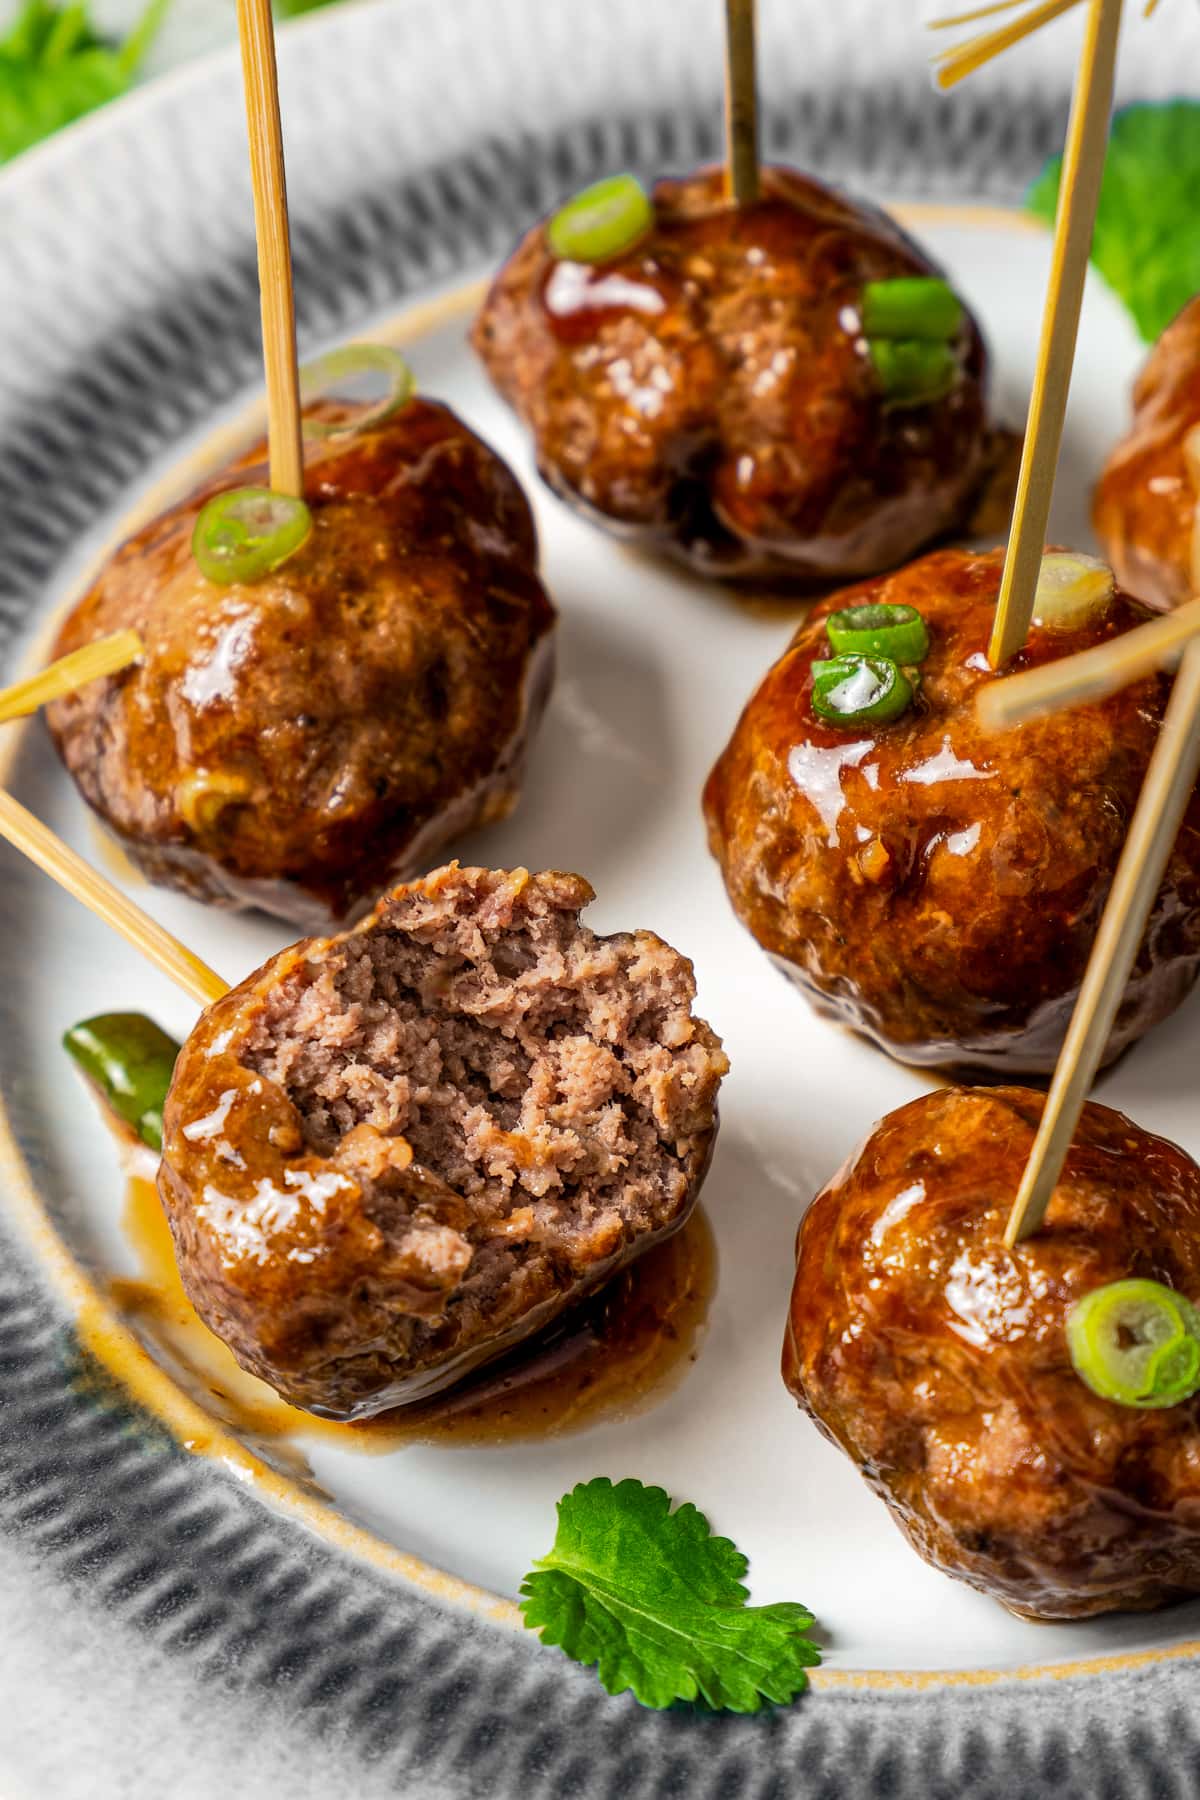 Meatballs skewered with toothpicks on a plate. One meatball has a bite taken out of it.